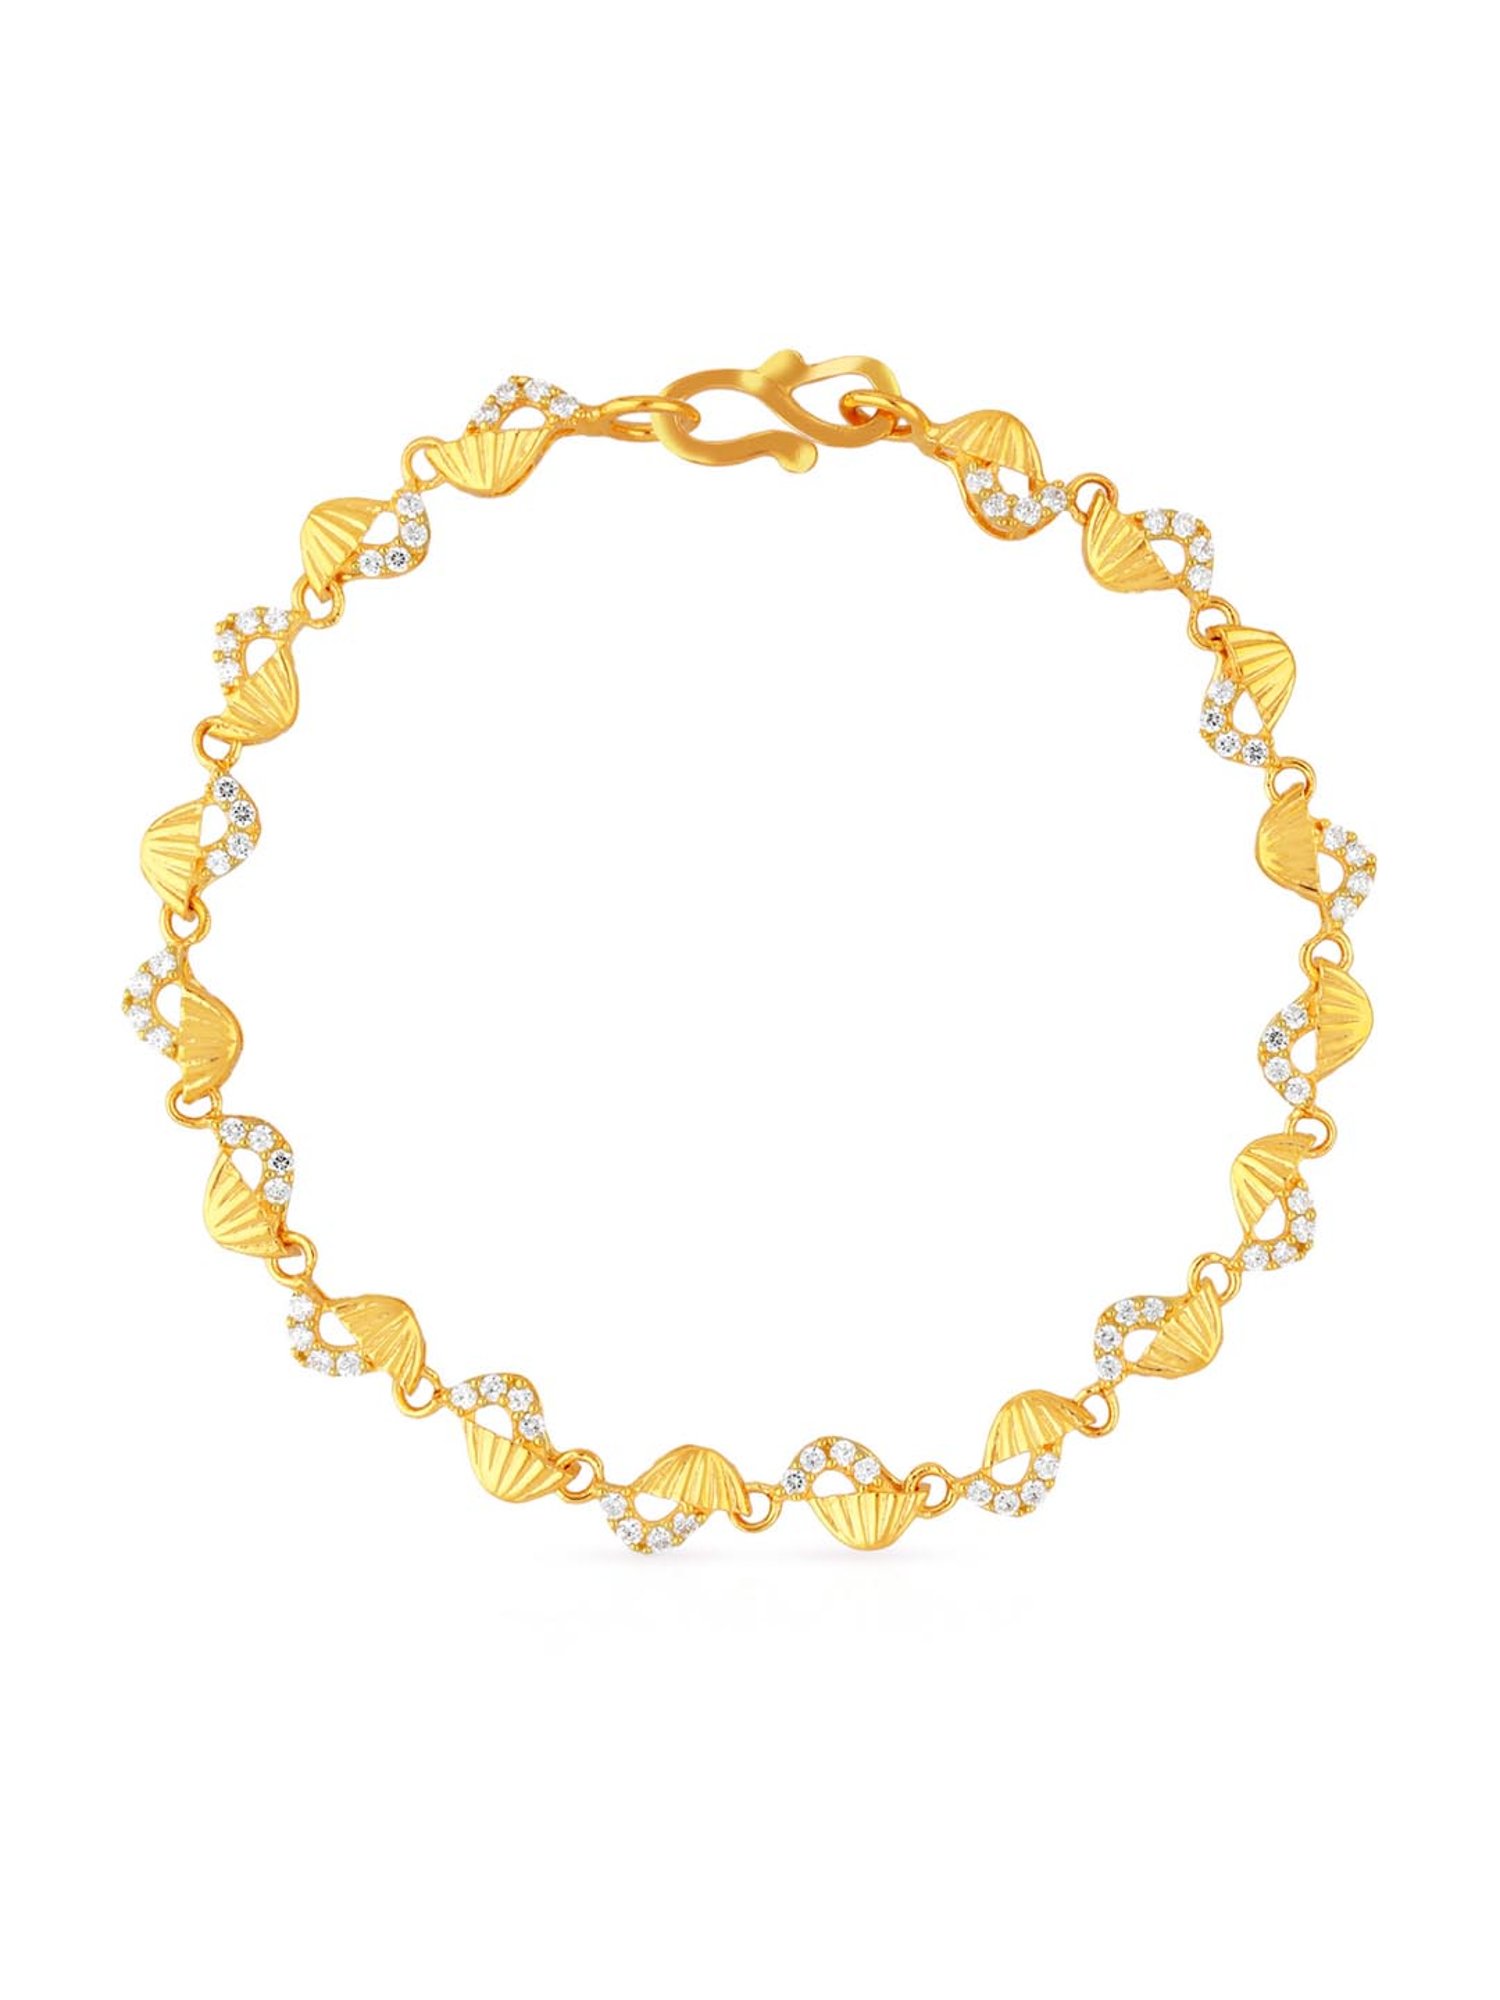 Alistair White and Yellow Gold Bracelet, 916 Gold ND03-001-330422